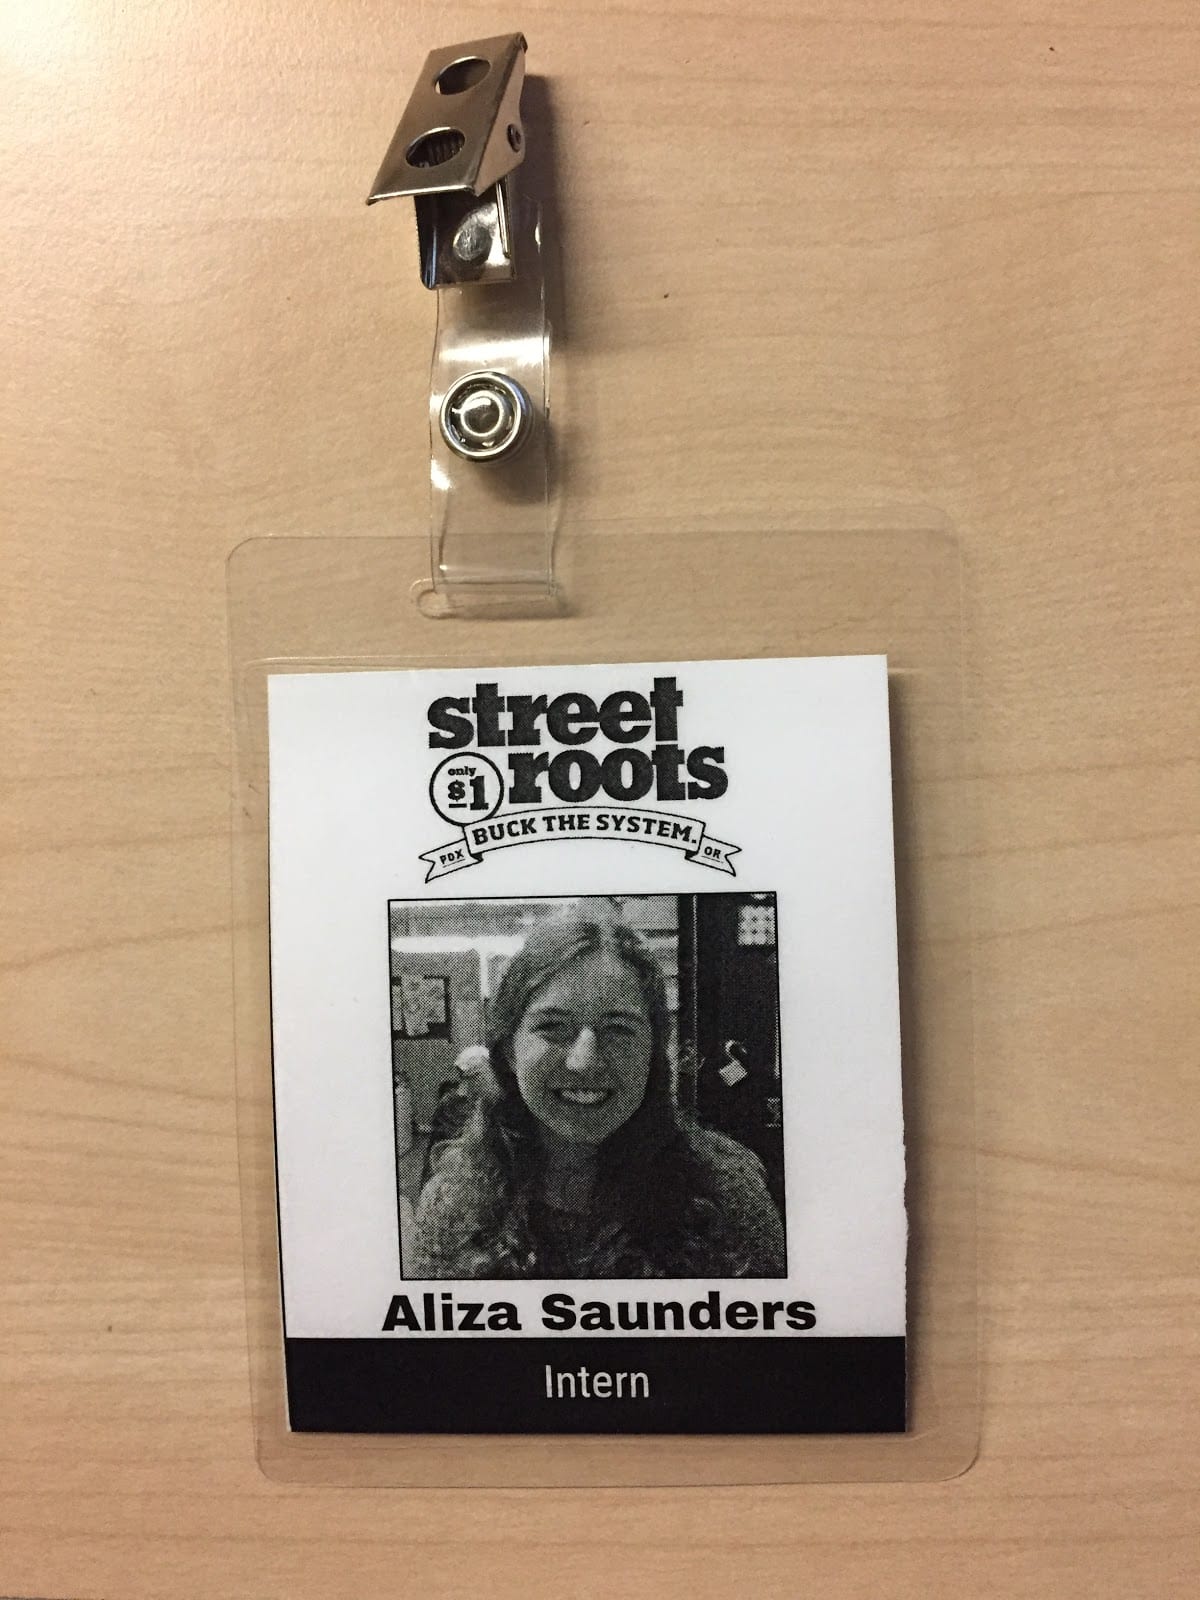 Aliza’s name badge she wears each day at work. Street Roots vendors wear similar badges when they sell their papers.